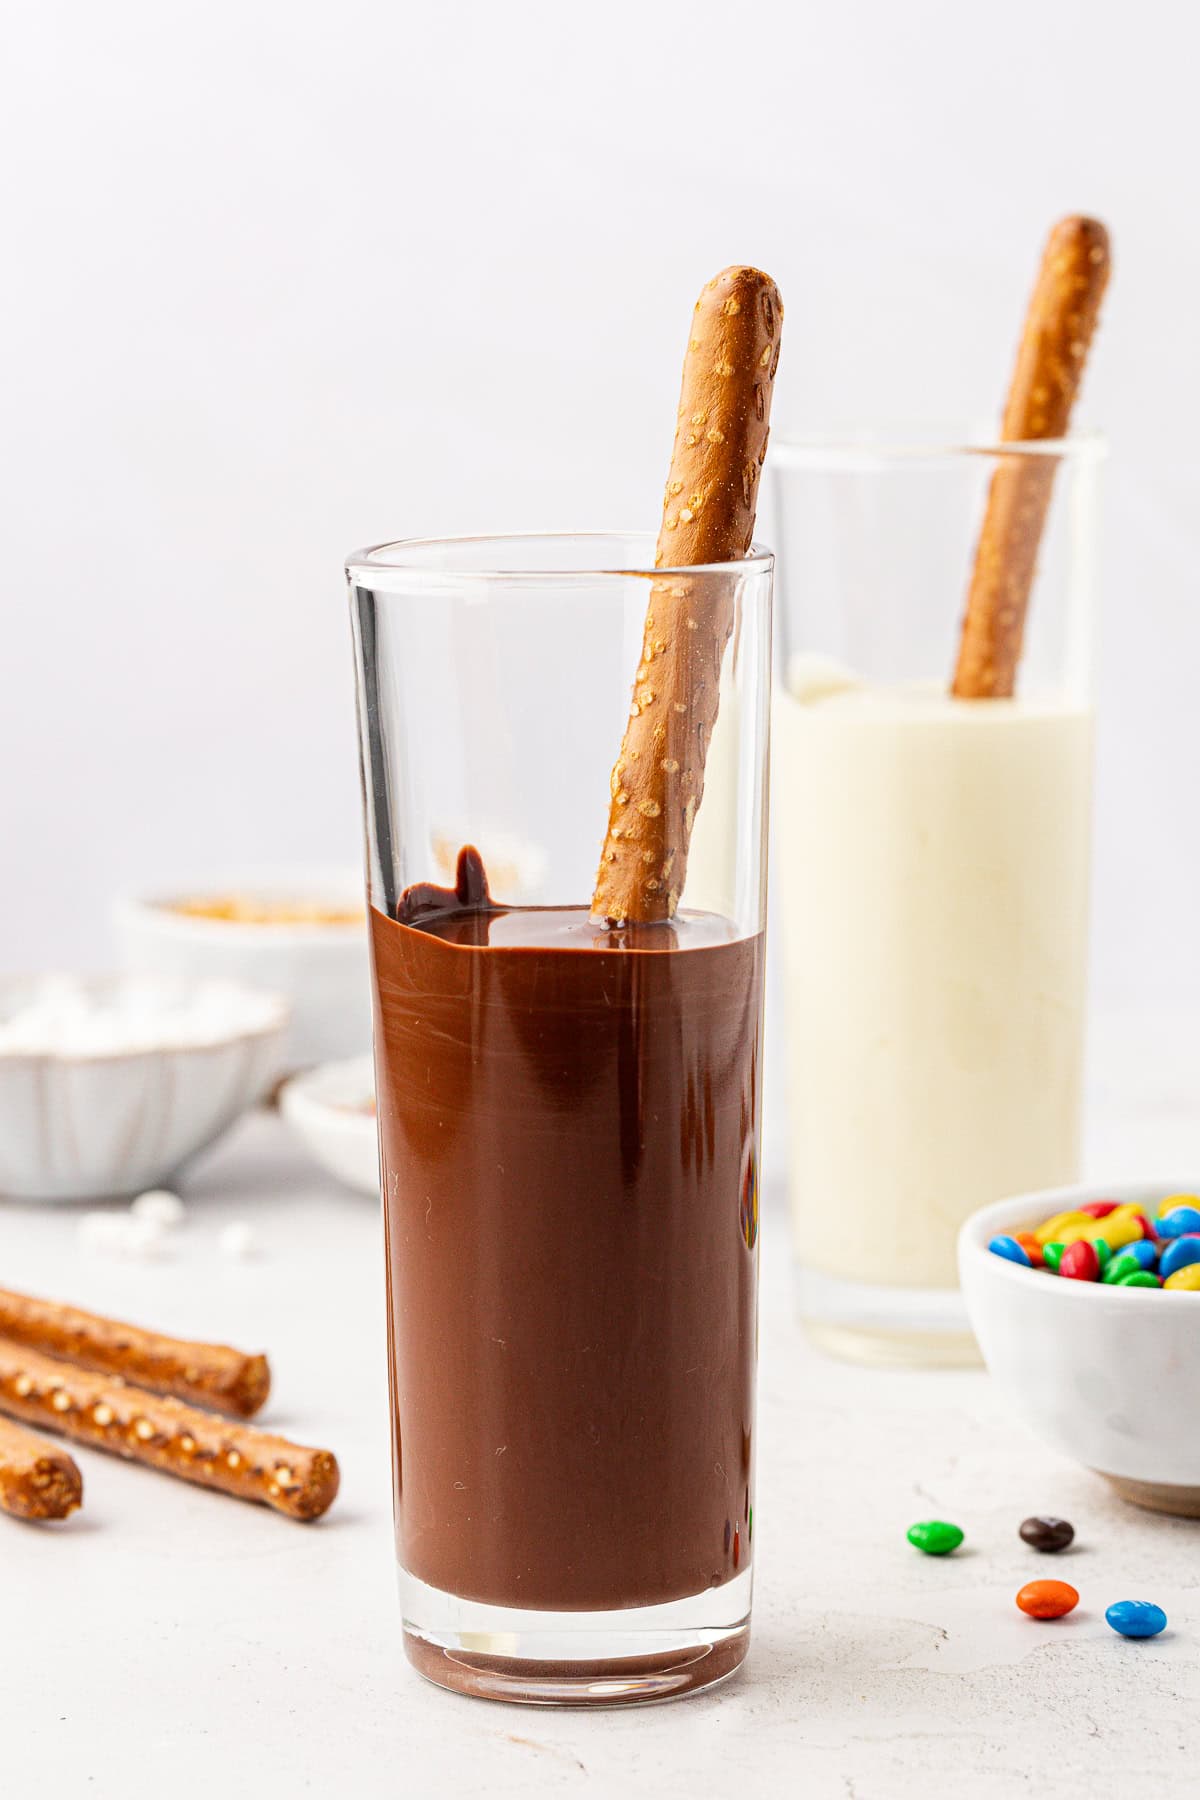 two tall glasses, one filled with melted chocolate and the other filled with melted white chocolate, each with a pretzel rod stuck into them, a bowl of m&ms, and more pretzel rods and m&ms scattered around